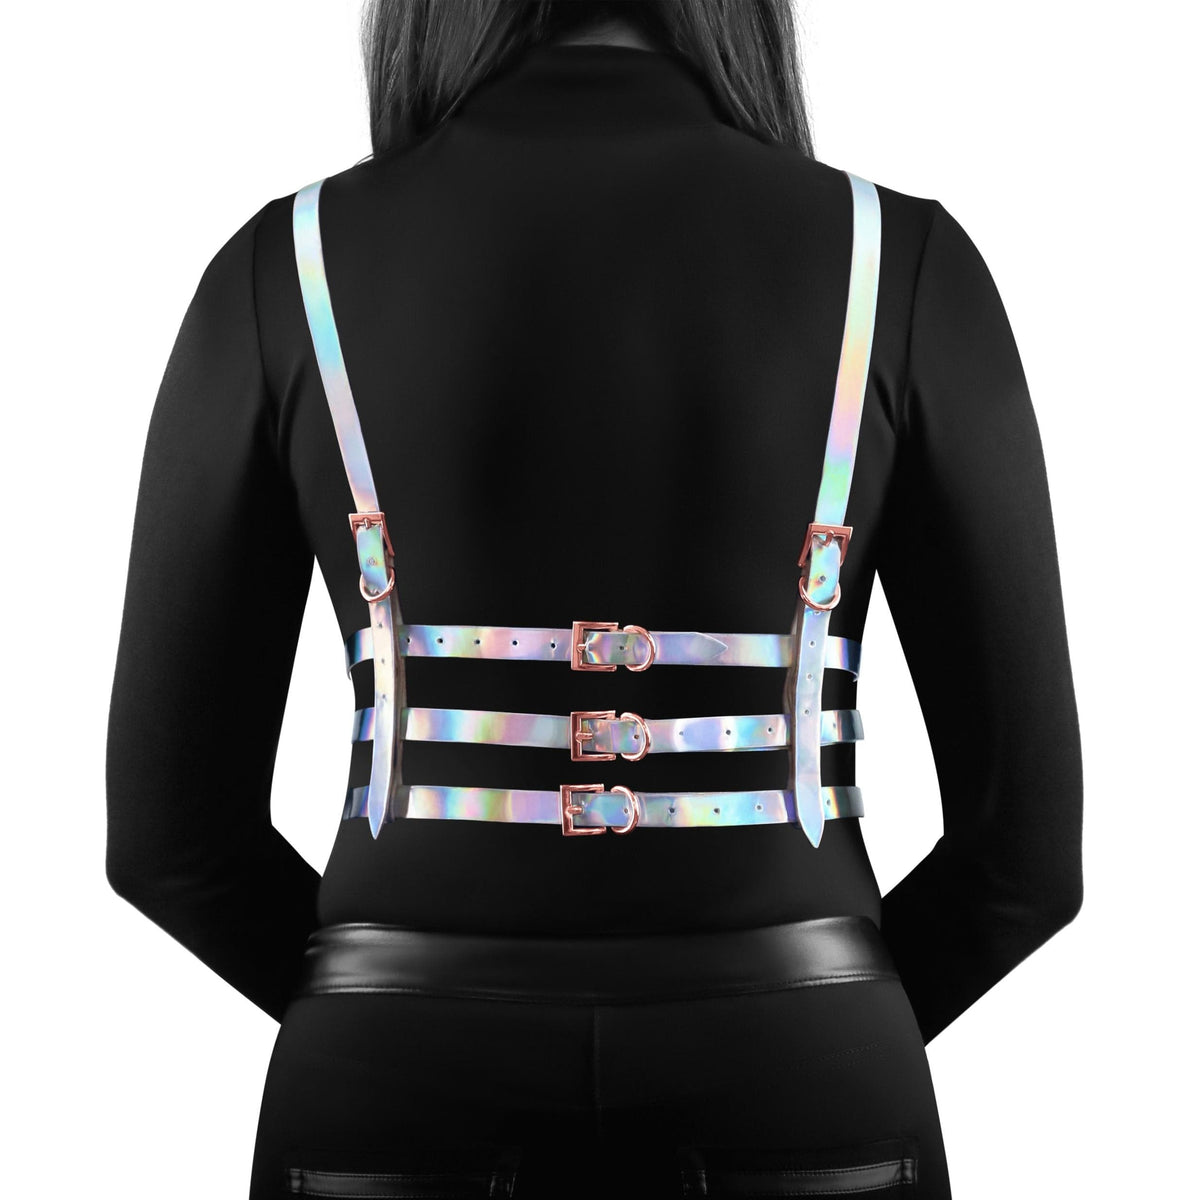 cosmo harness bewitch large xlarge rainbow